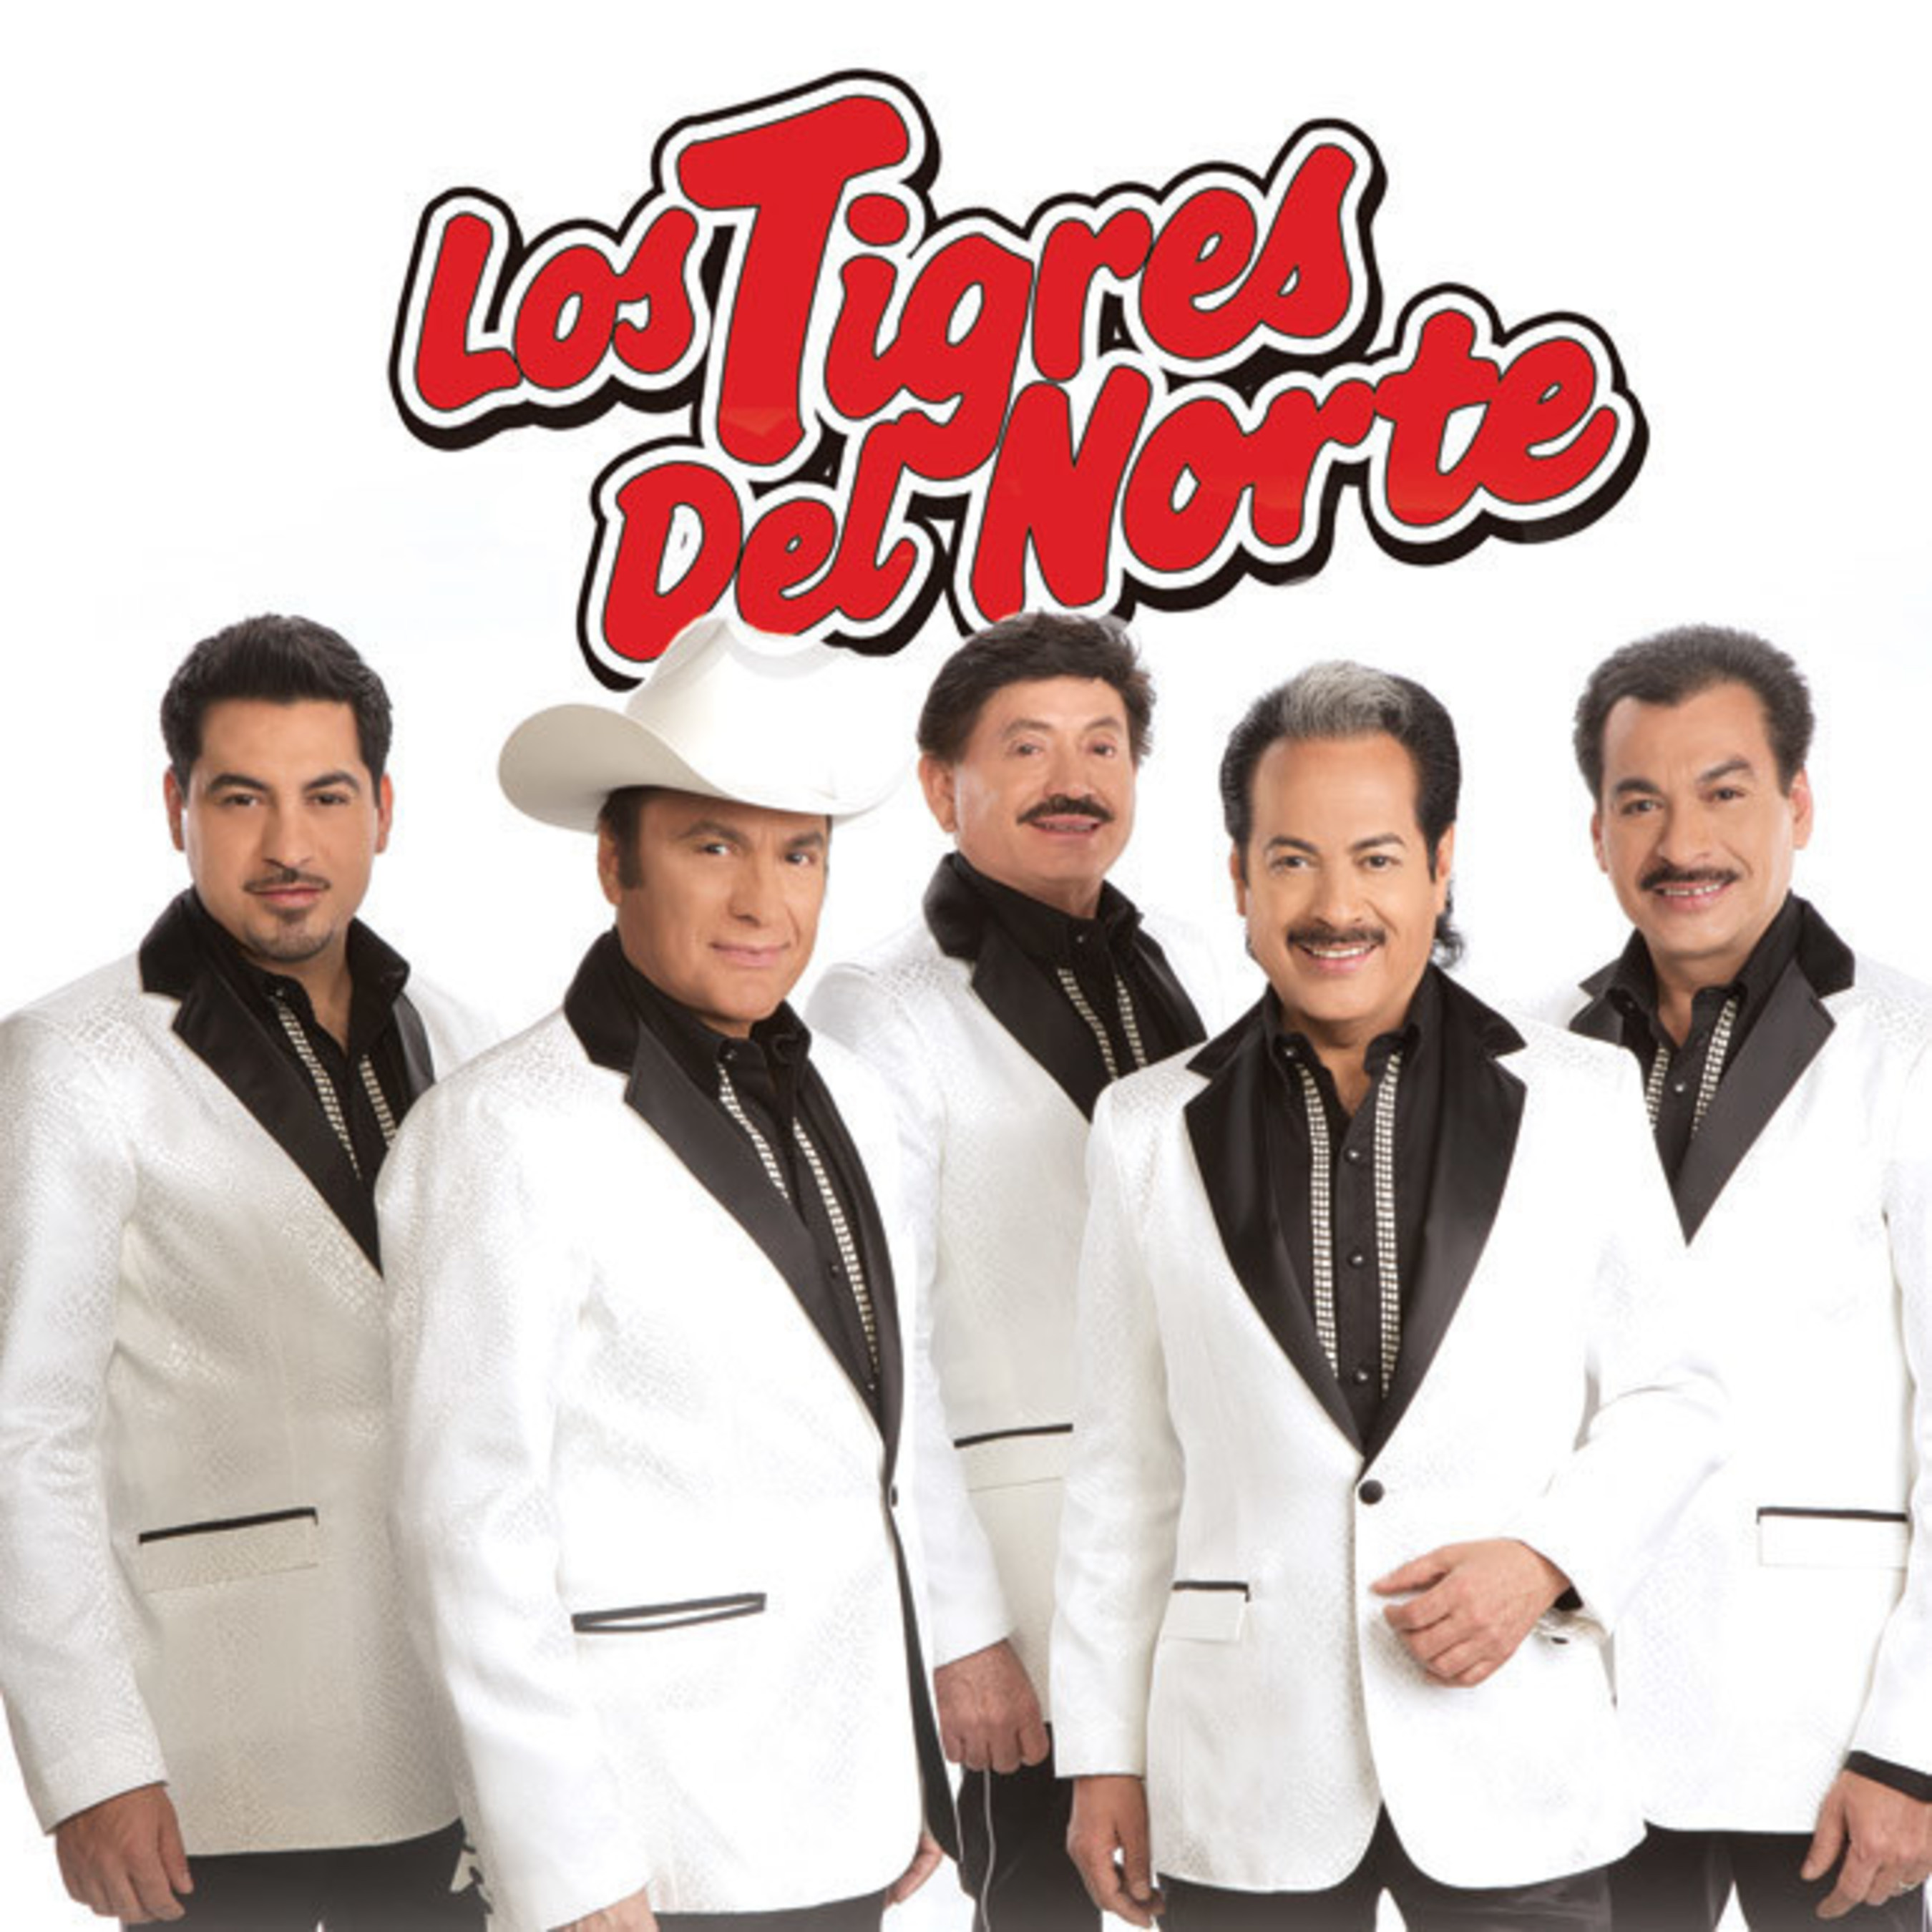 Badlands Entertainment Group and Badlands Pawn are bringing the six-time Grammy award-winning Latin super group Los Tigres del Norte to Sioux Falls for a truly once in a lifetime Cinco de Mayo celebration on May 5.